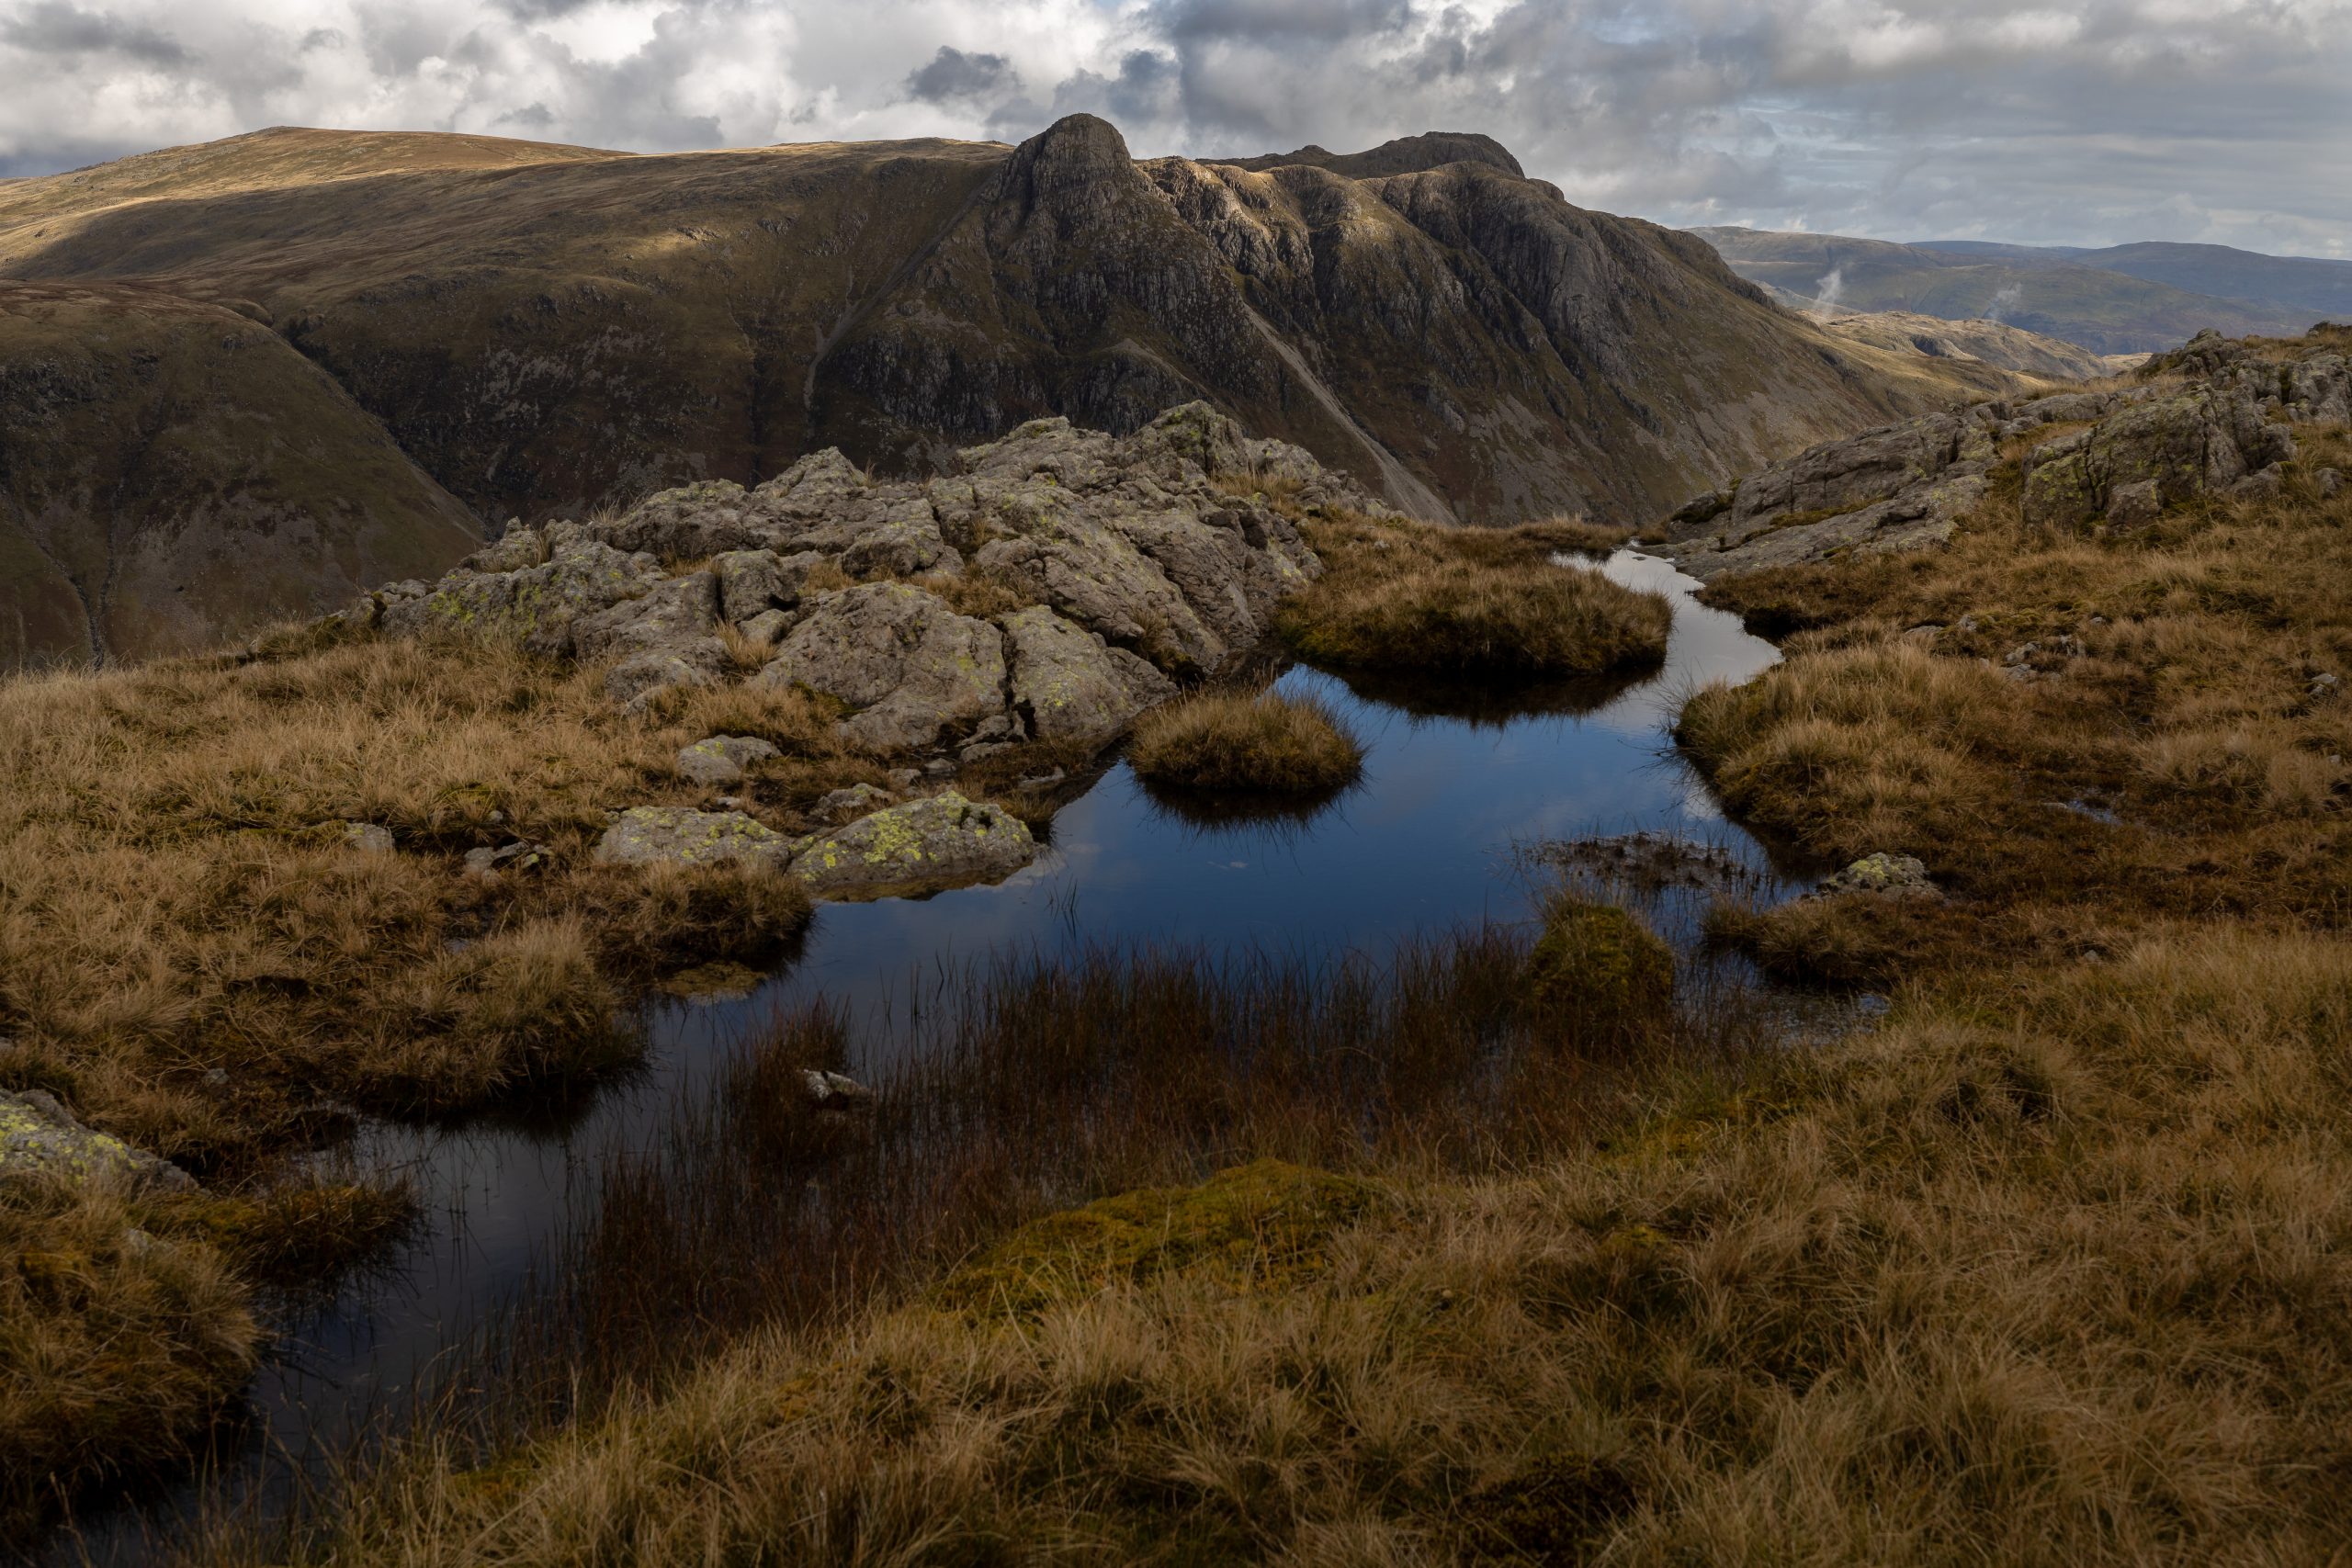 The Langdale Pikes seen from the Band, on Bowfell during a guided walk in the Lake District